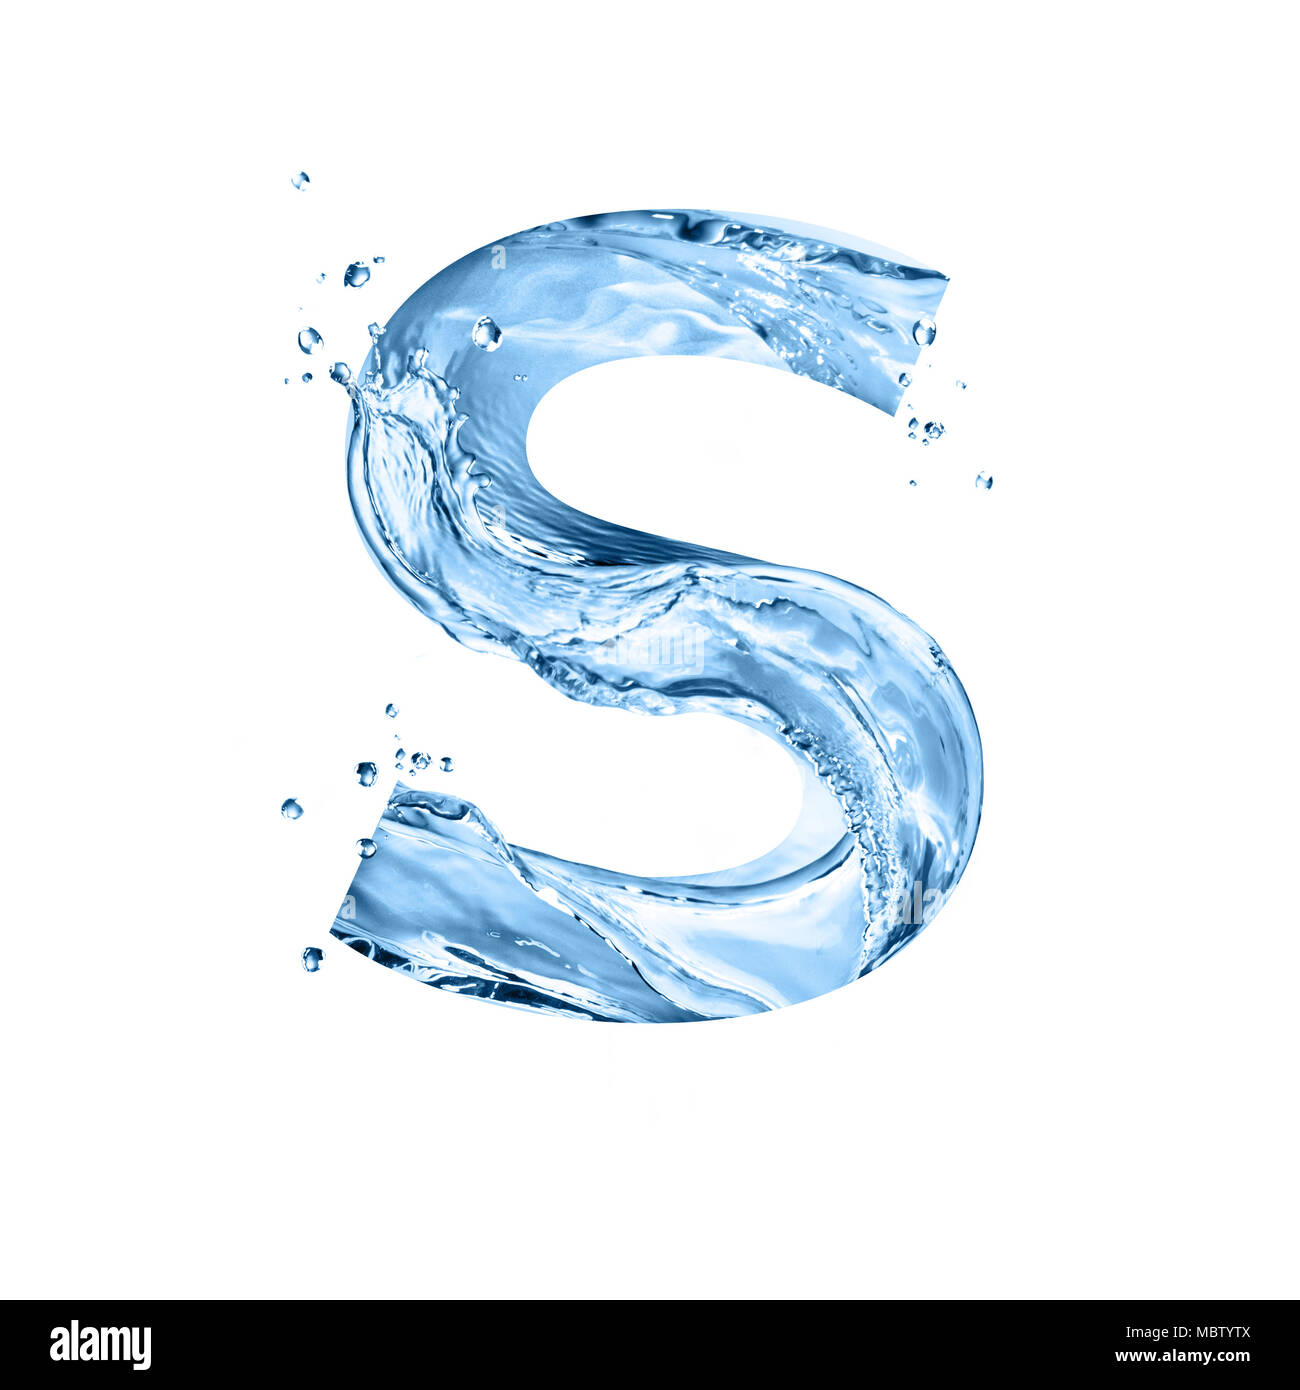 stylized font, art text made of water splashes, capital letter s, isolated on white background Stock Photo